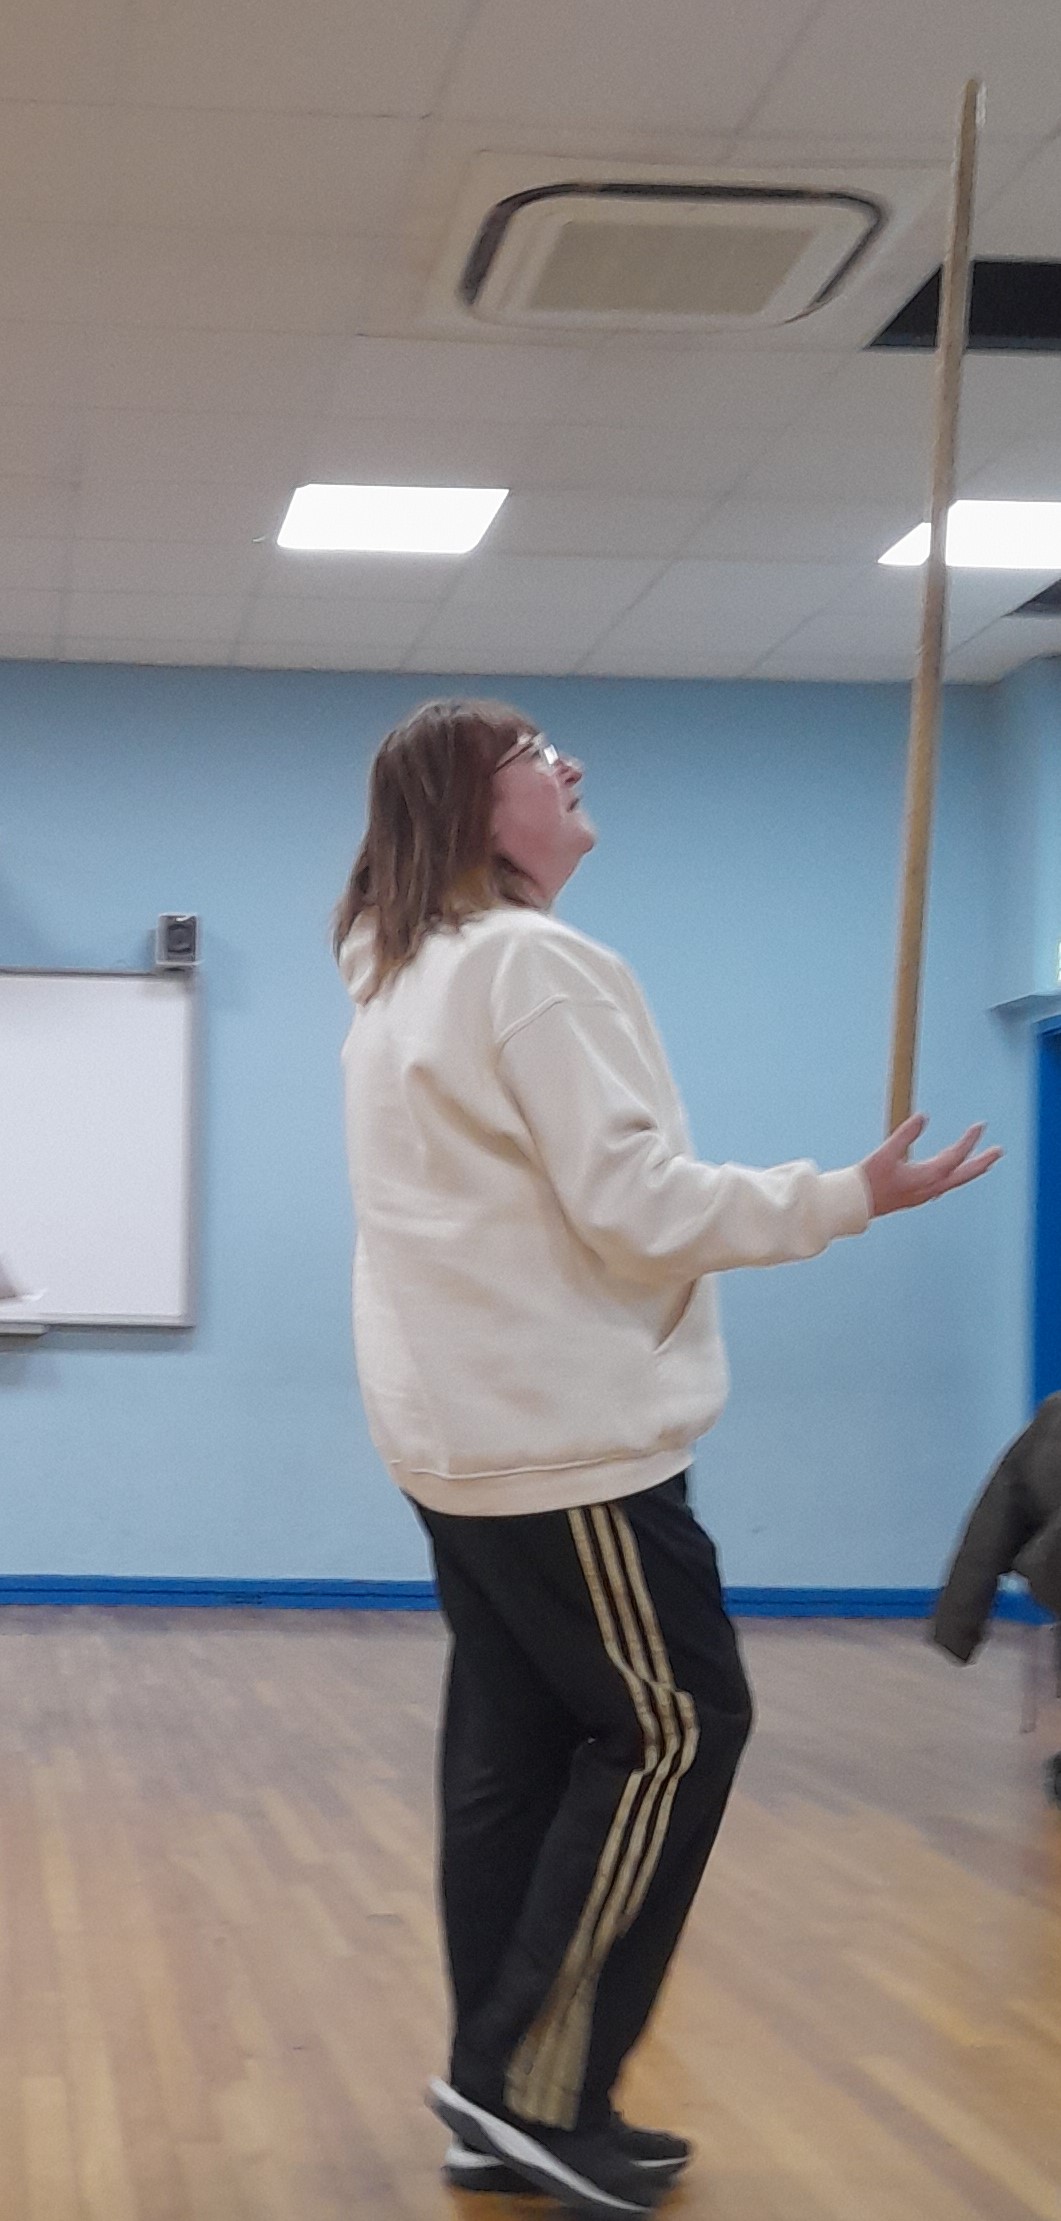 person balancing stick on hand